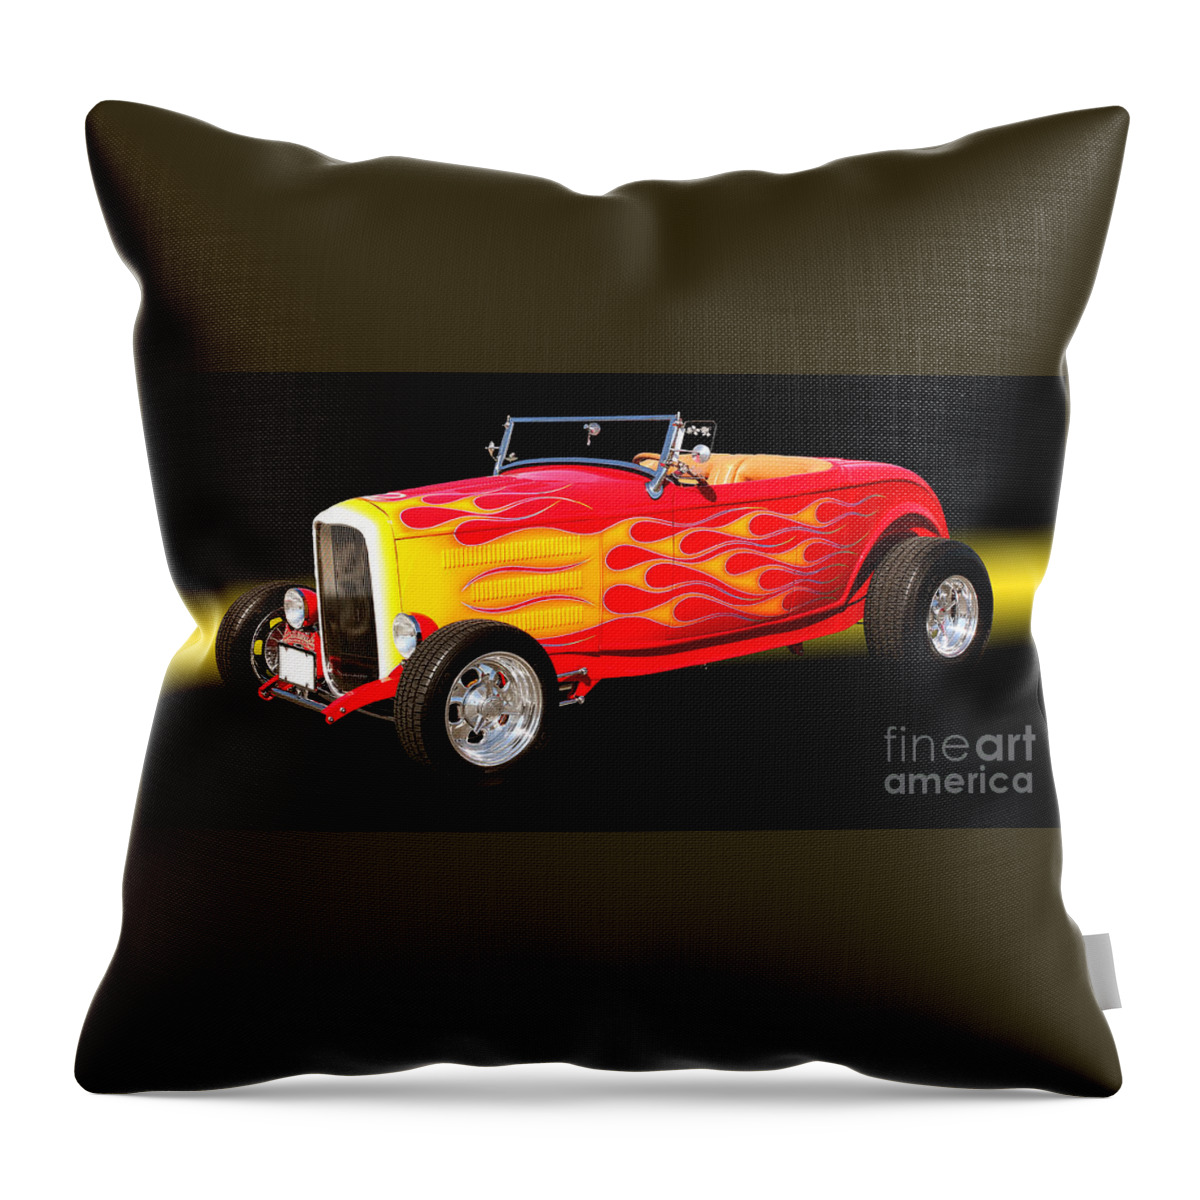 1932 Throw Pillow featuring the photograph 1932 Ford Hotrod by Jim Carrell